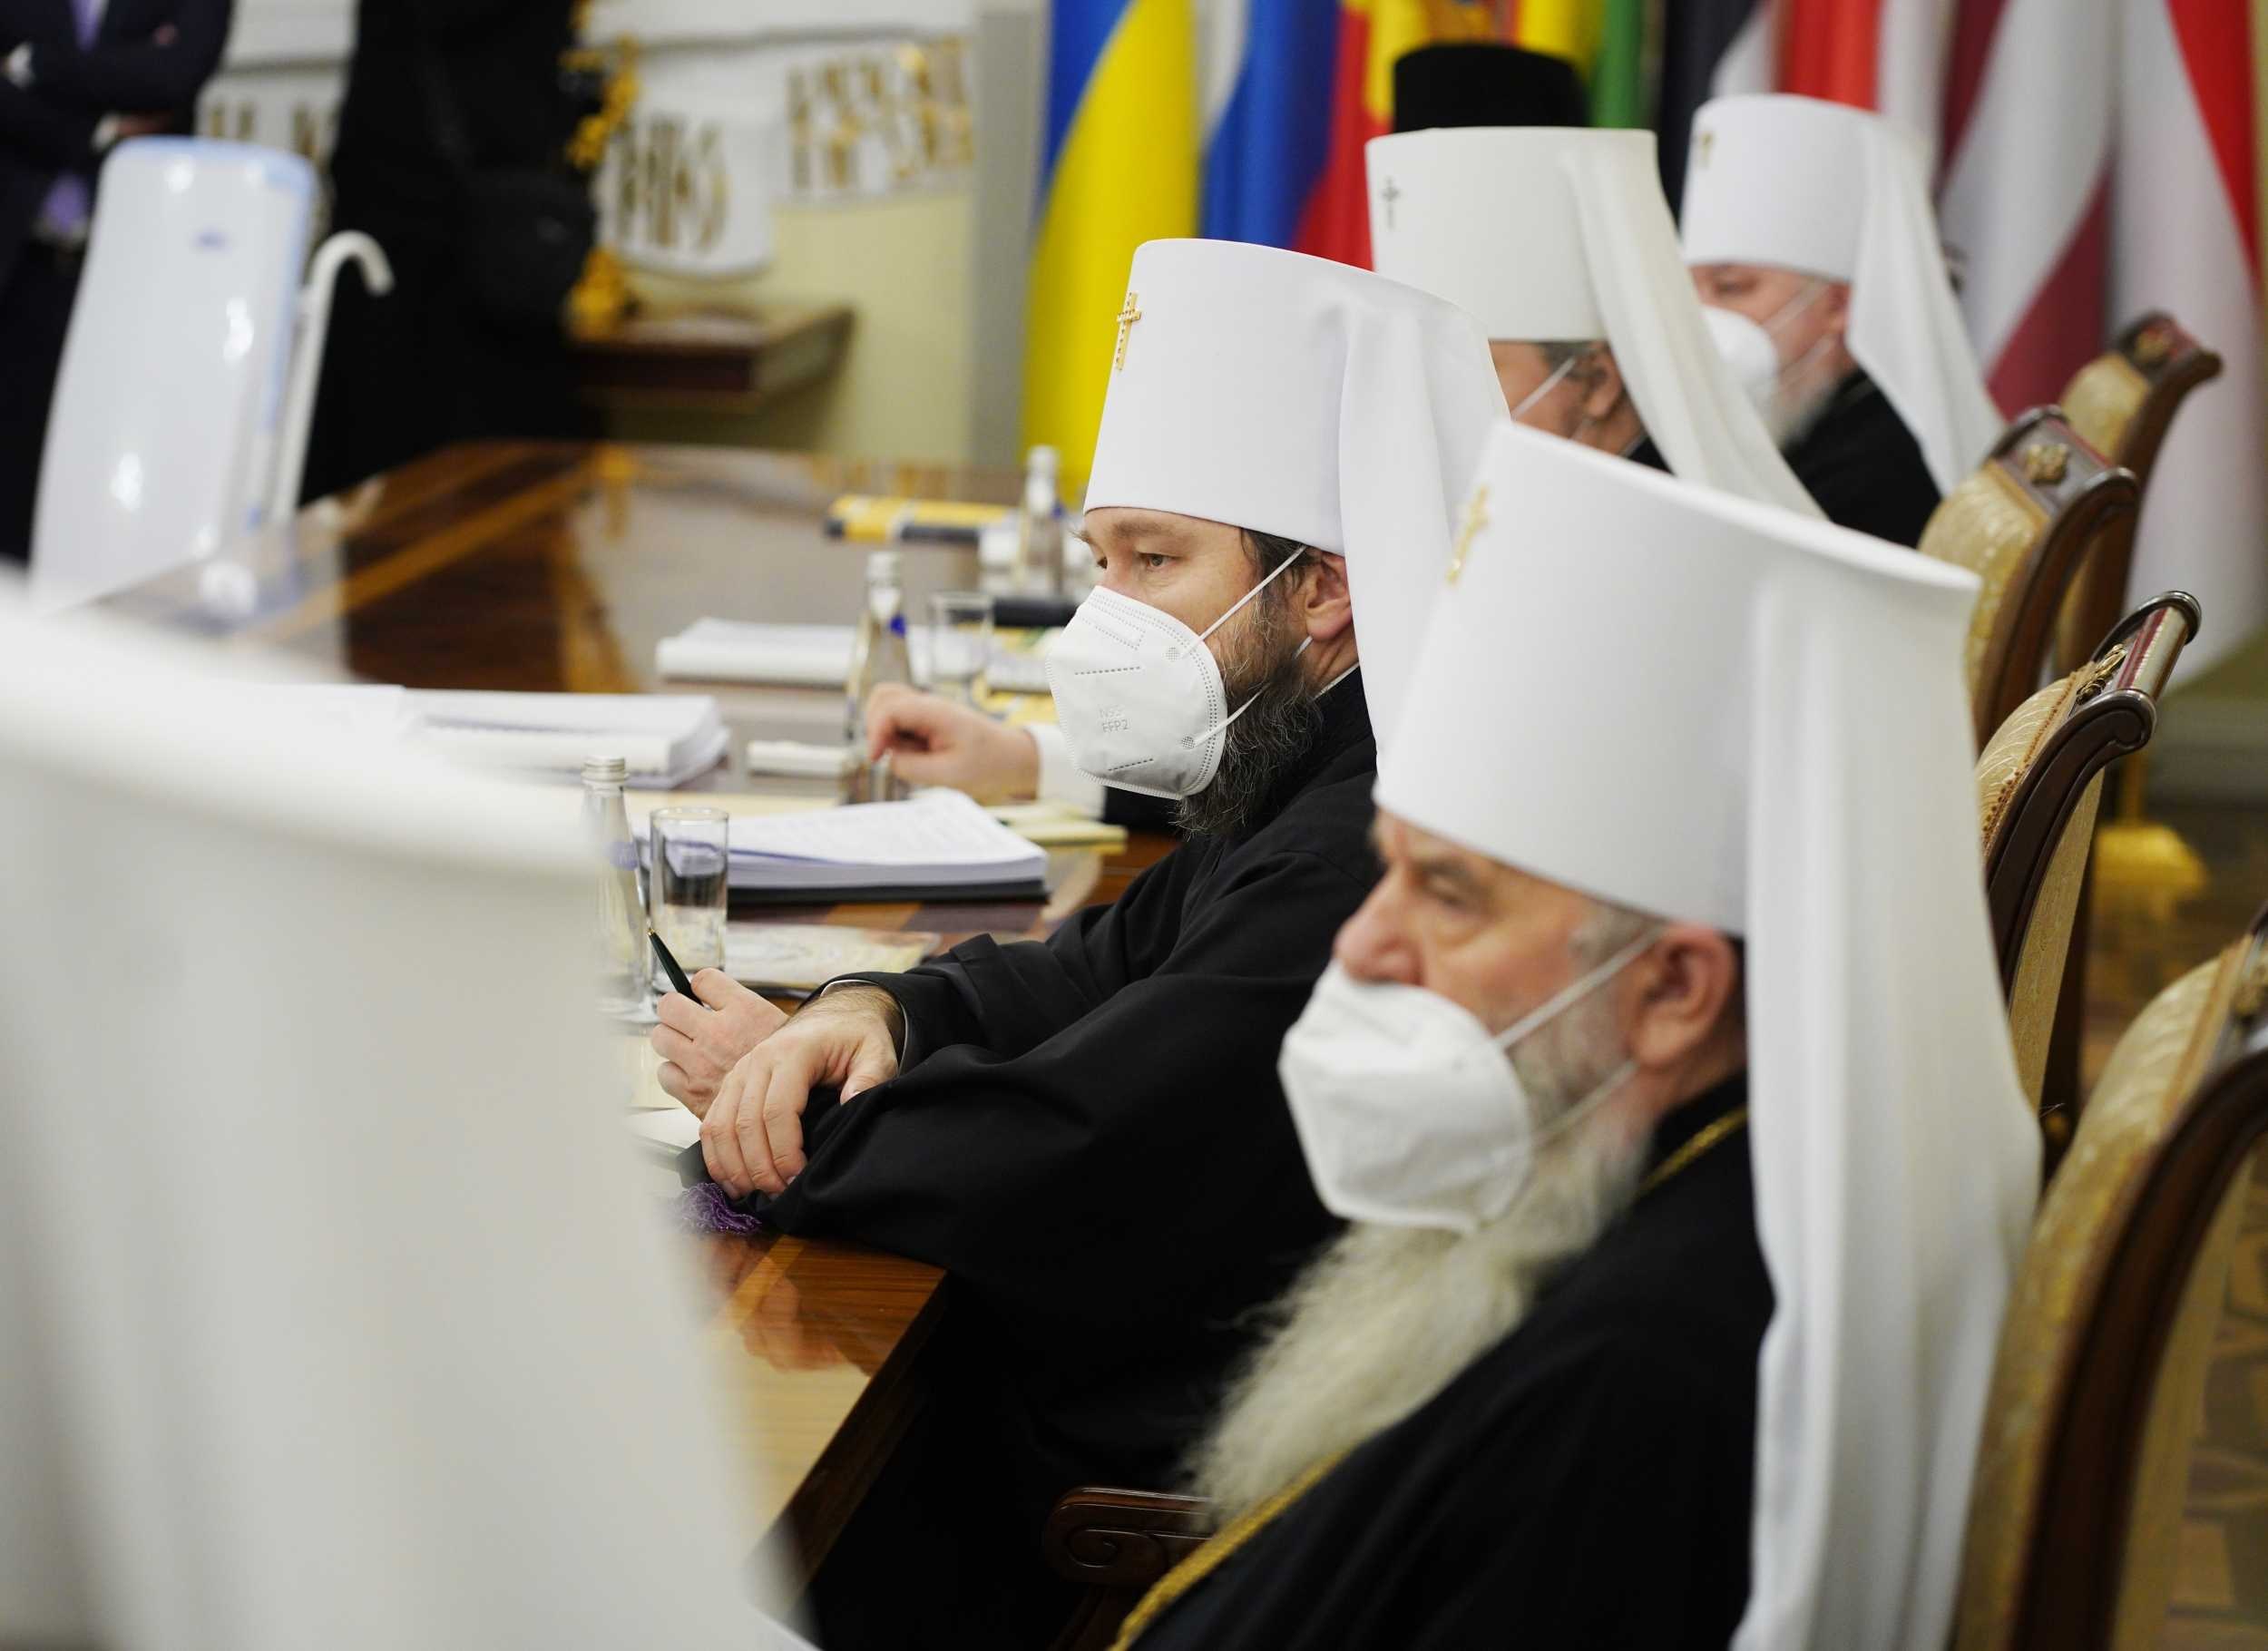 ROC responded to the accusations of the Patriarchate of Alexandria